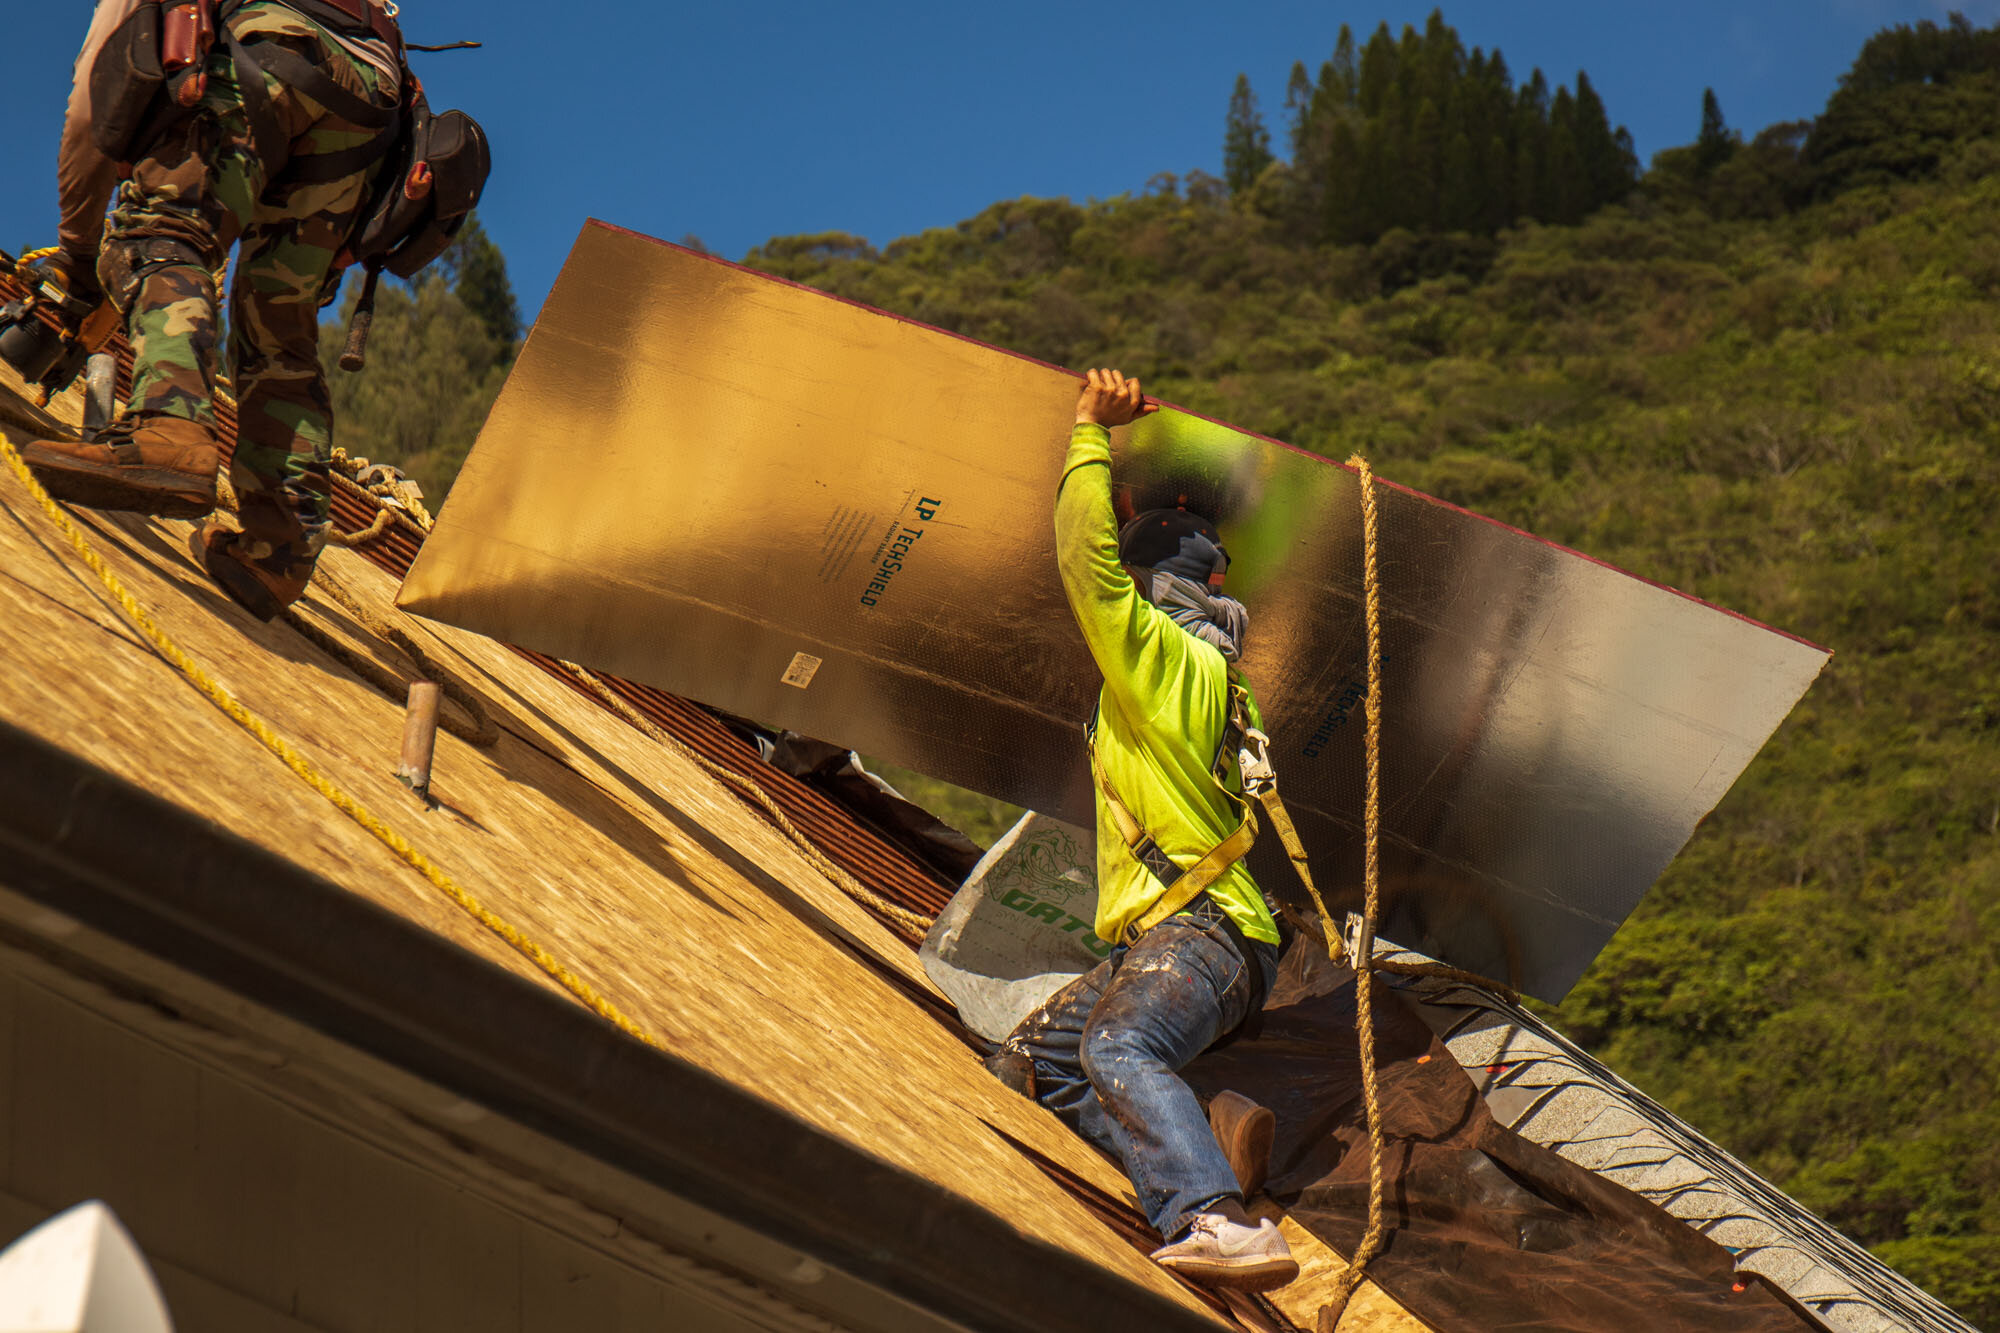 Roof_replacement_expedition_20201108_©_Howard_Wolff-2.jpg